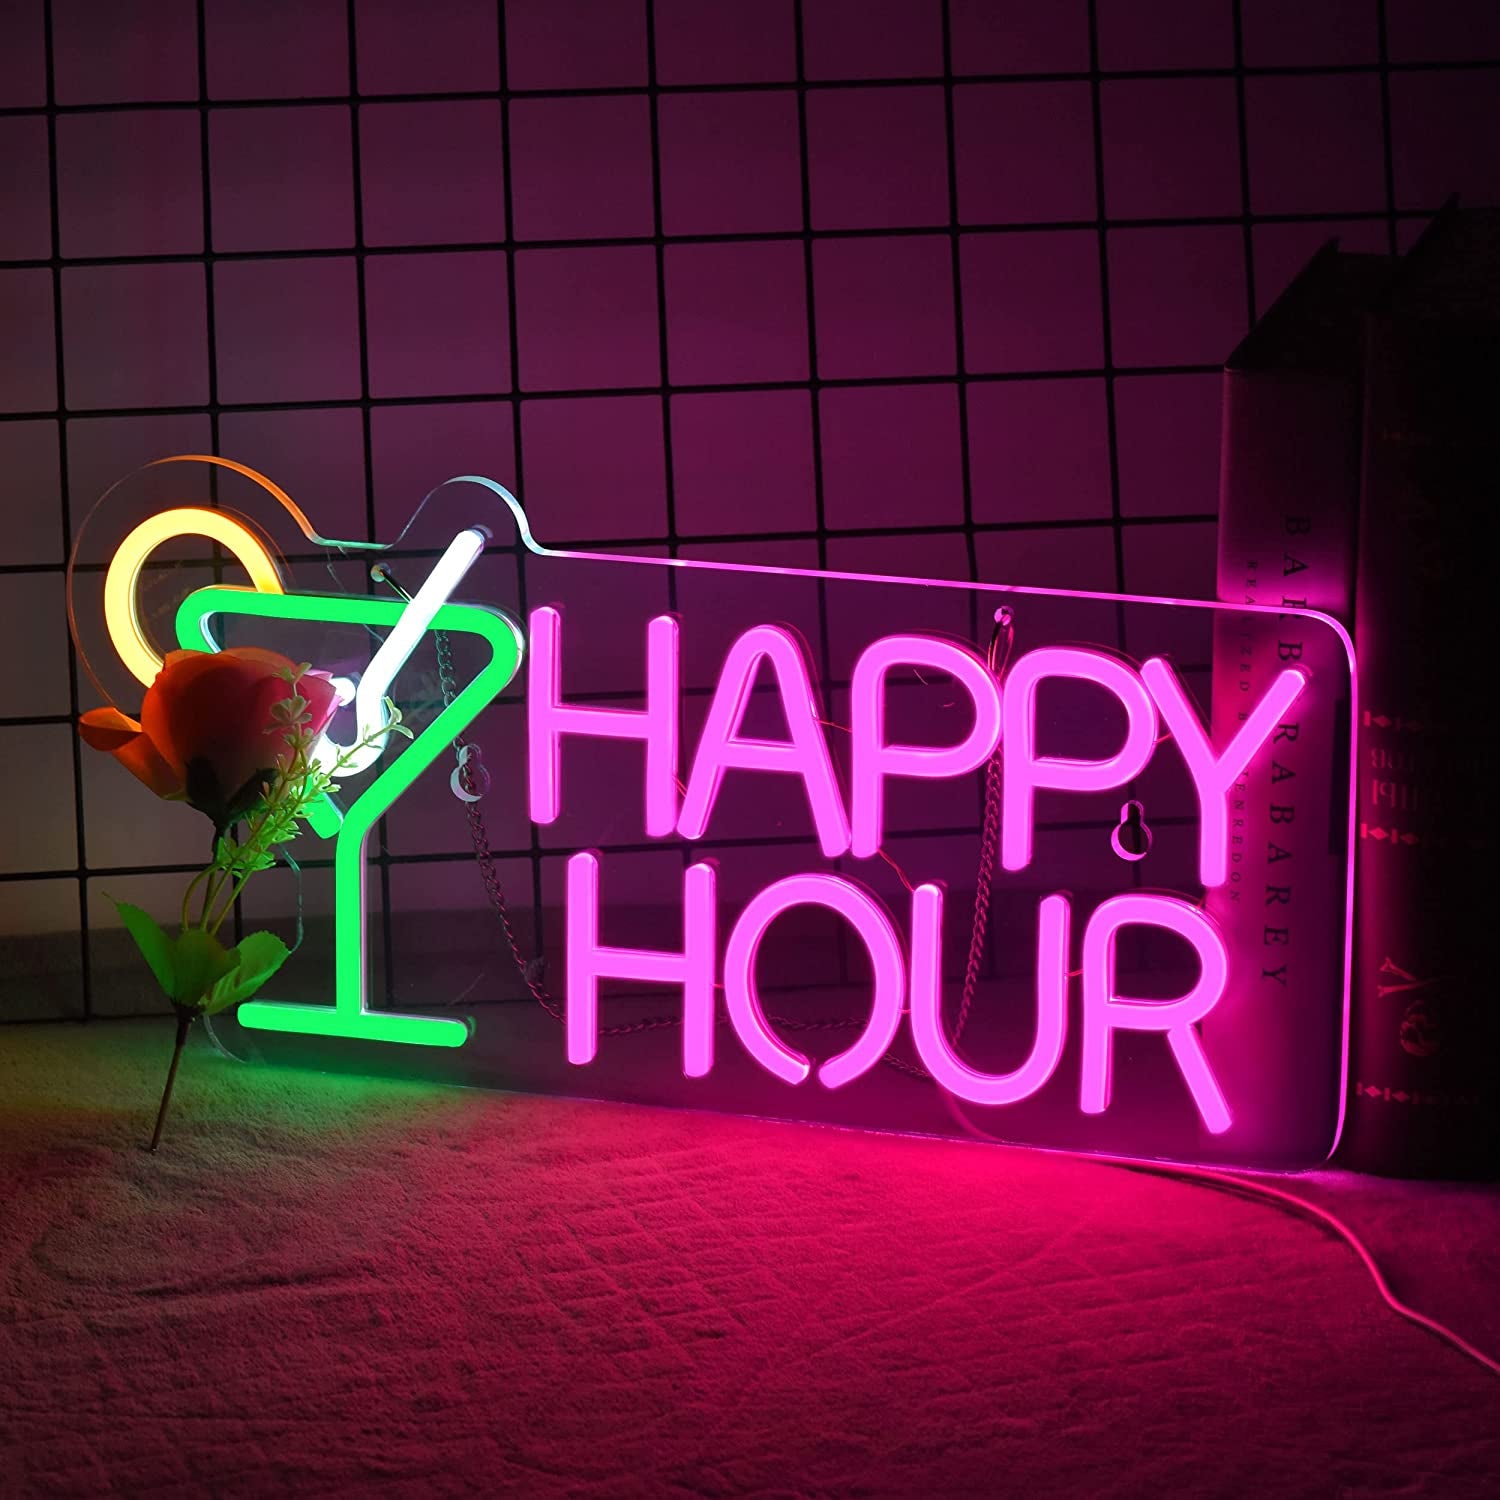 Neon Sign Bar Home Neon Light Handmade LED Dimmable Neon Lights Signs for Art Man Cave Bedroom Office Hotel Pub Cafe Recreation Room Wall Artwork Sign Decor